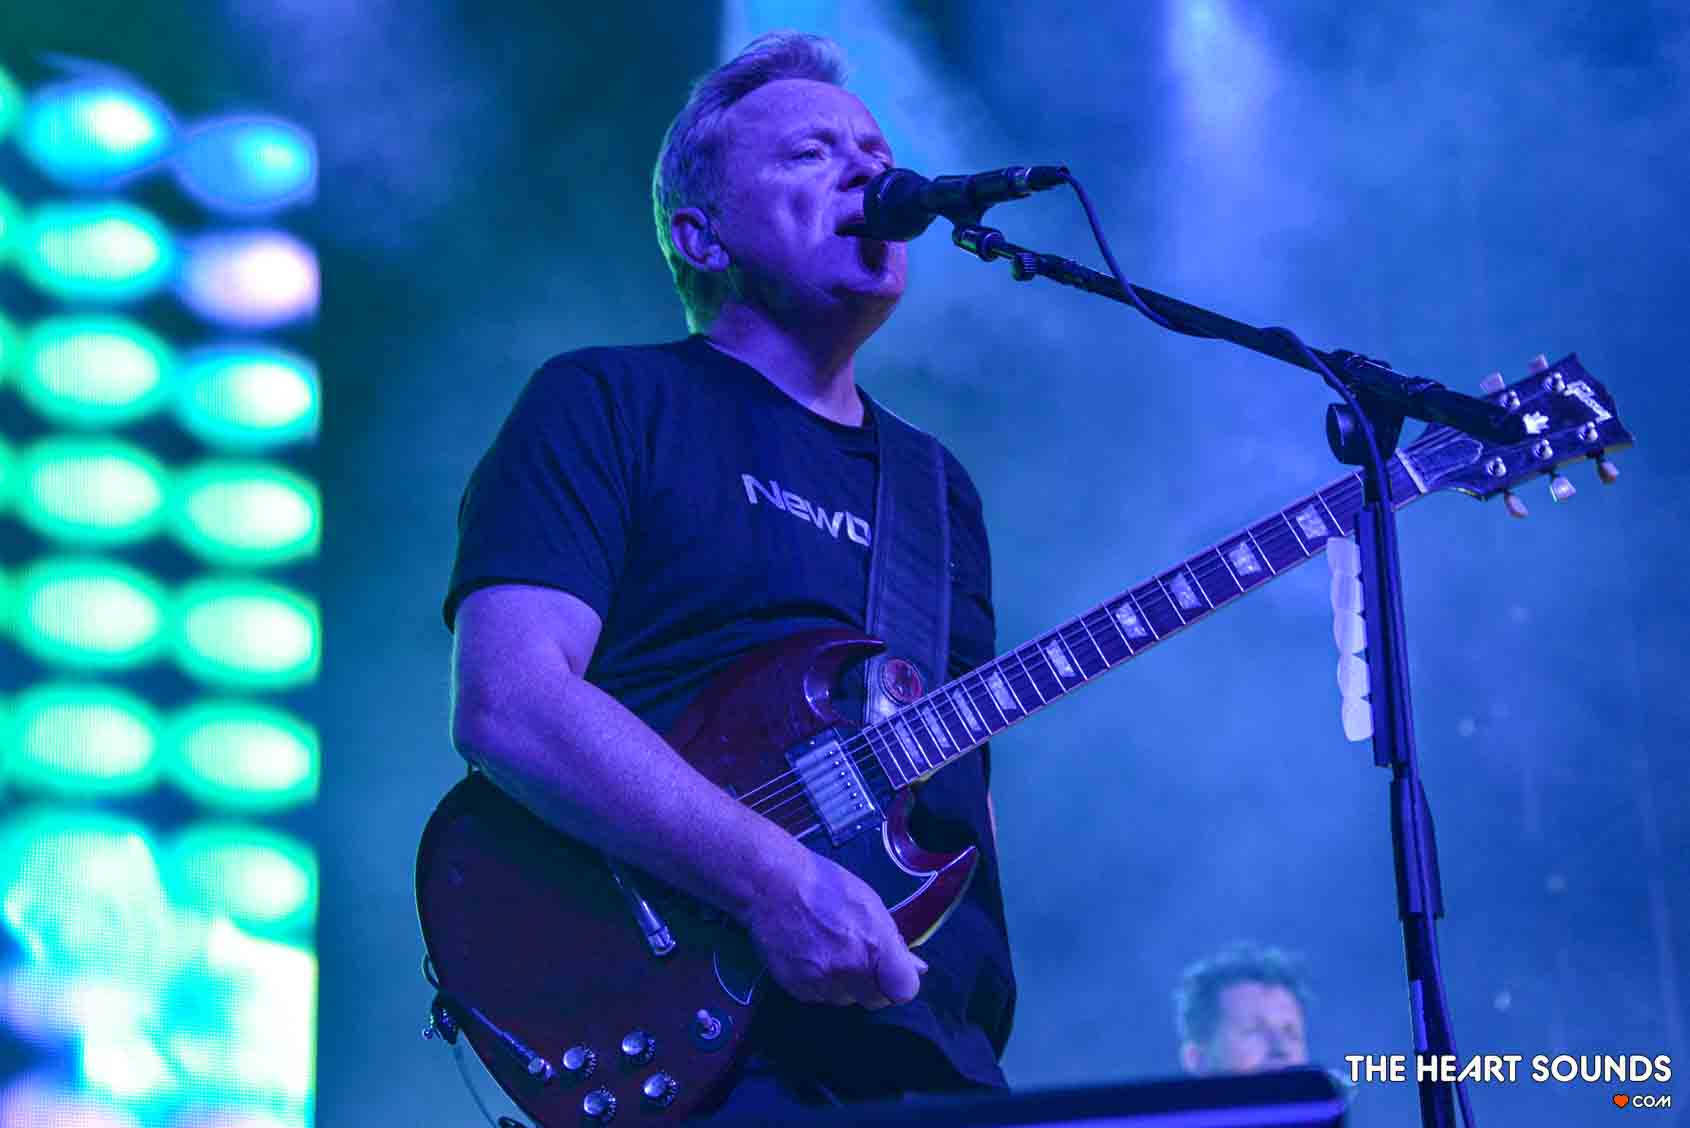 New Order is coming to Texas! The Heart Sounds